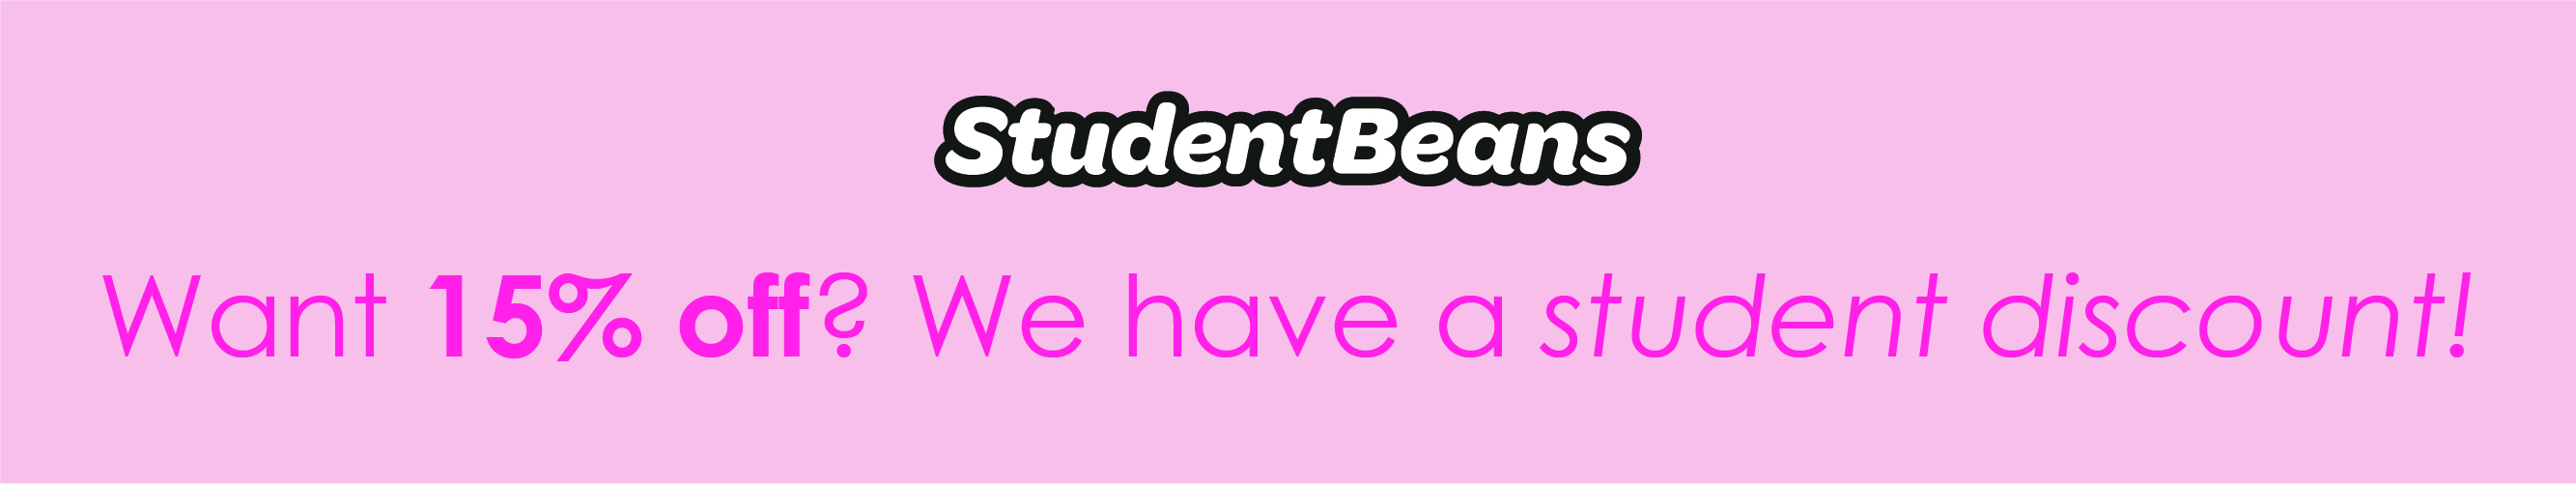 Want 15% off? We have a student discount!